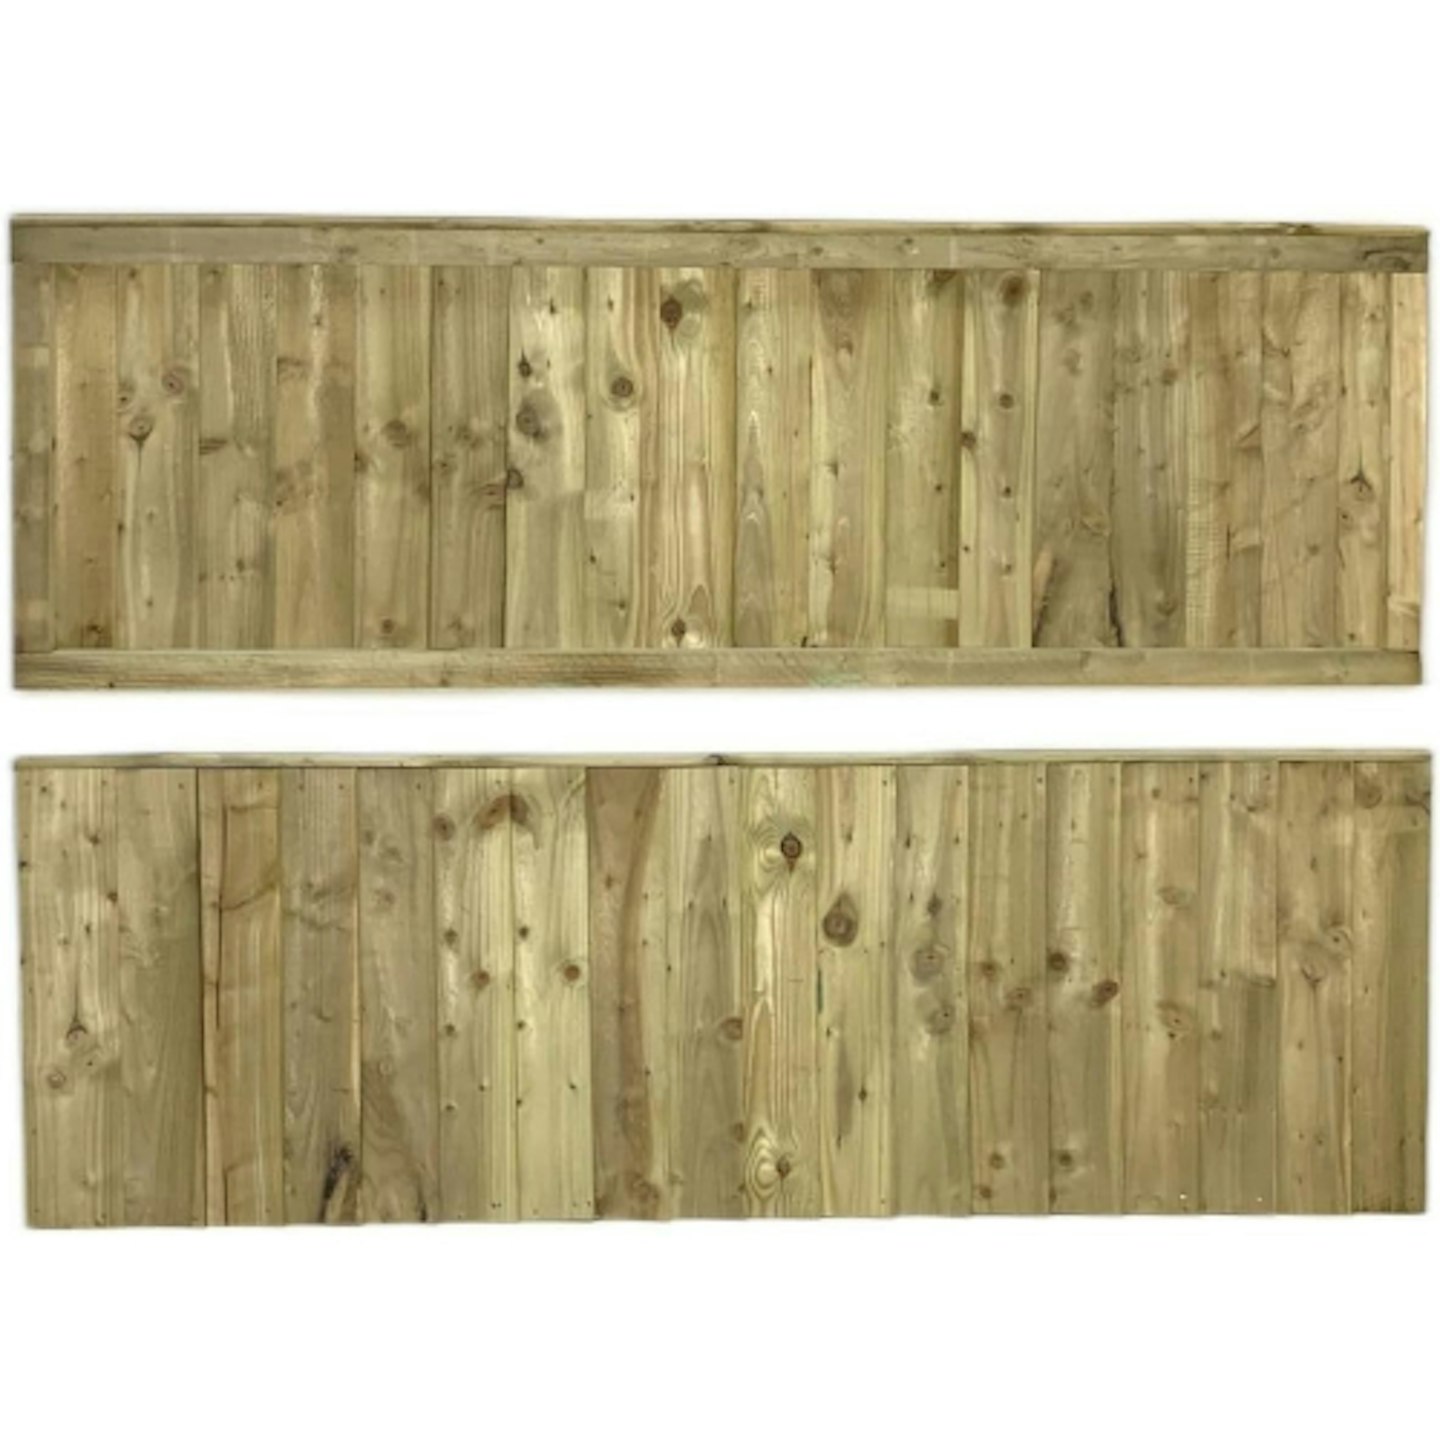 PGS wooden fence 